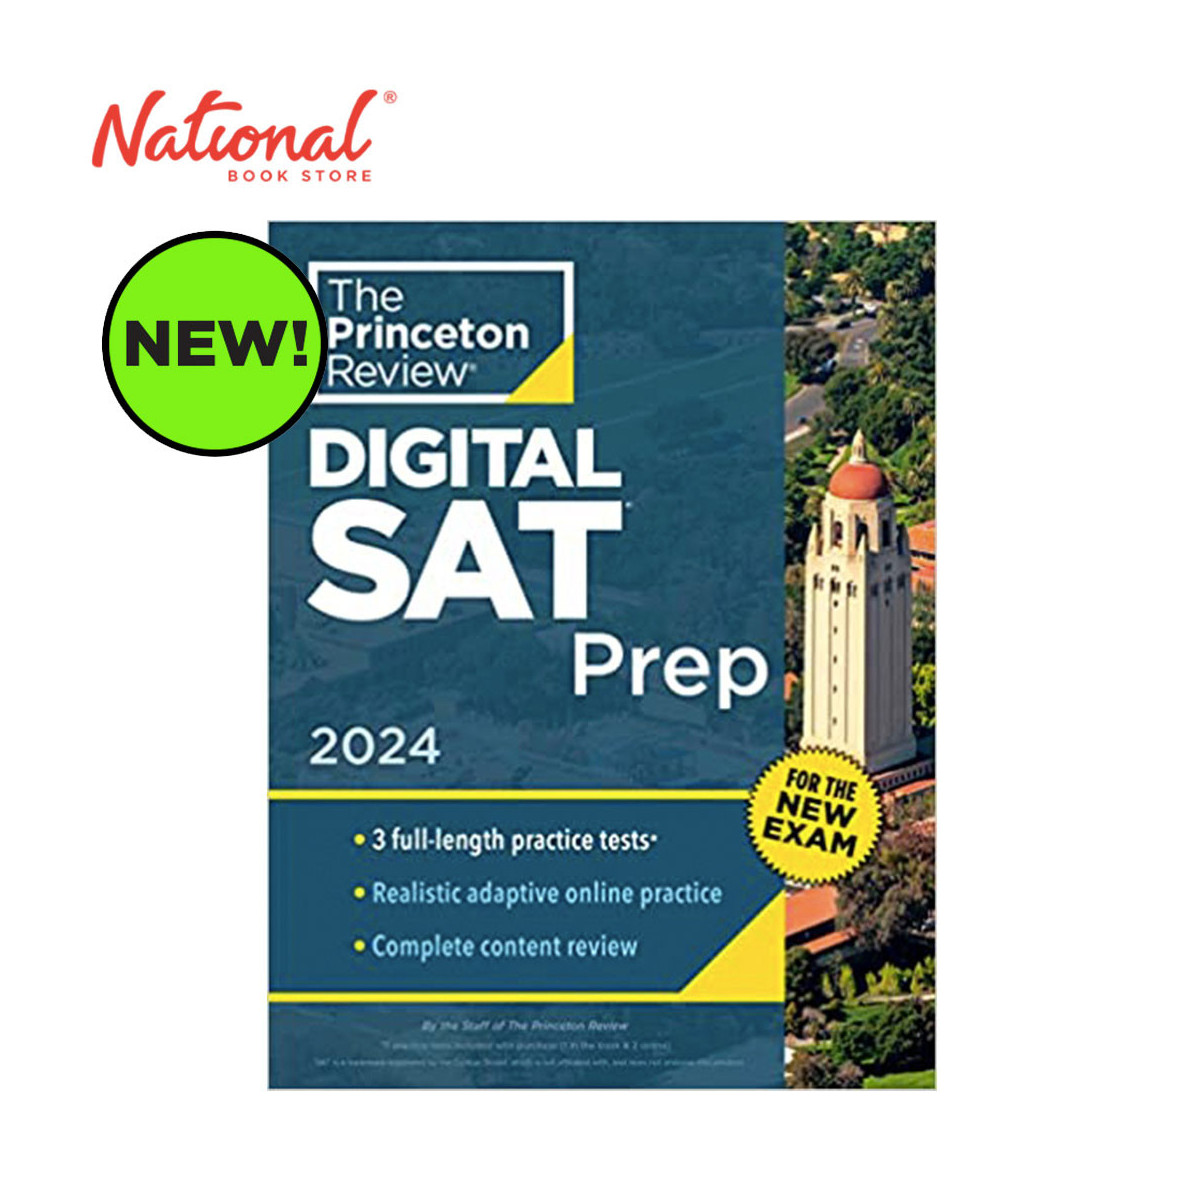 Princeton Review Digital SAT Prep 2024 by The Princeton Review - Trade Paperback - Test Reviewer